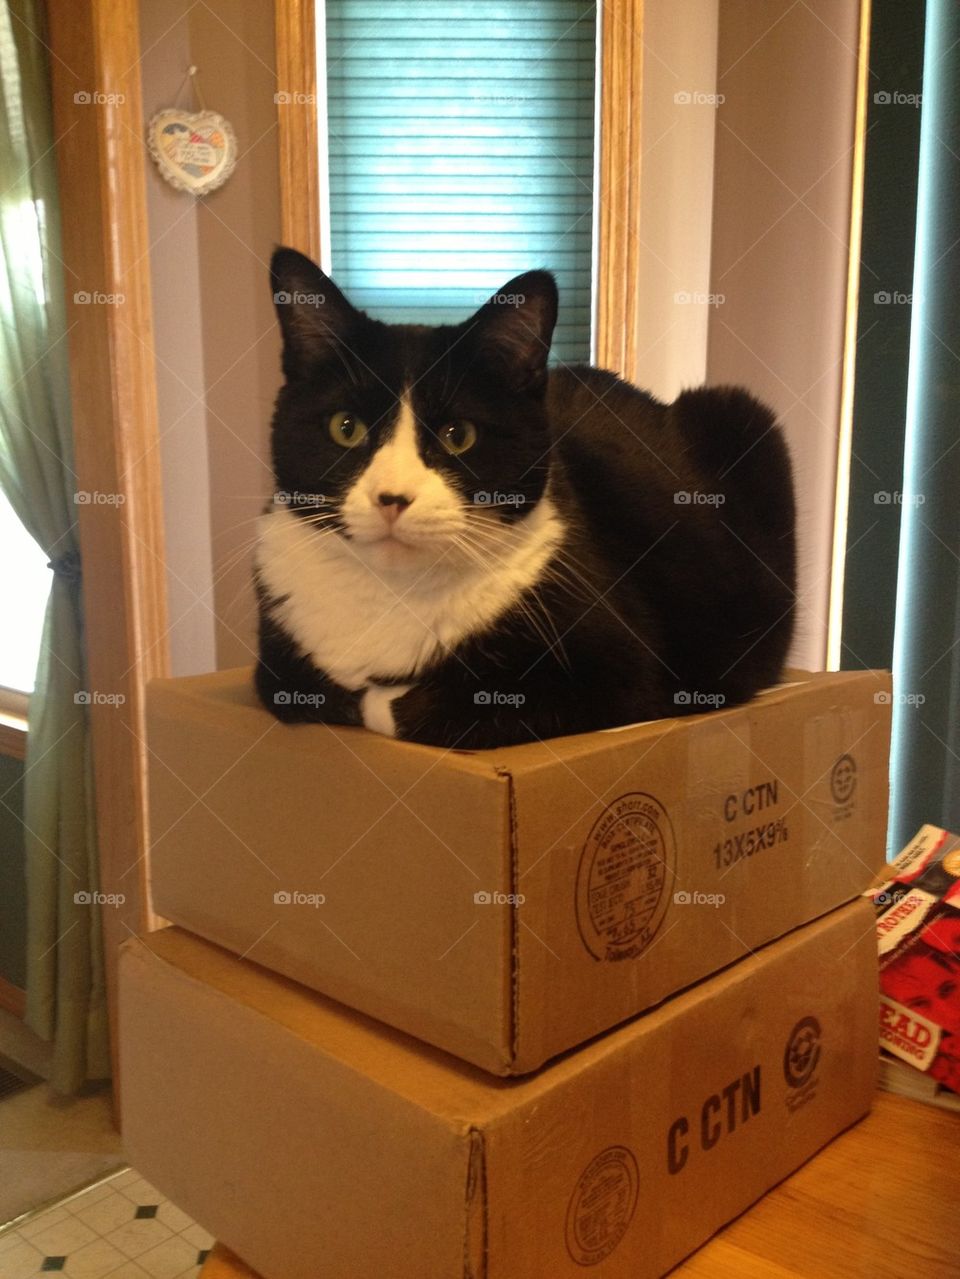 Riley on boxes!